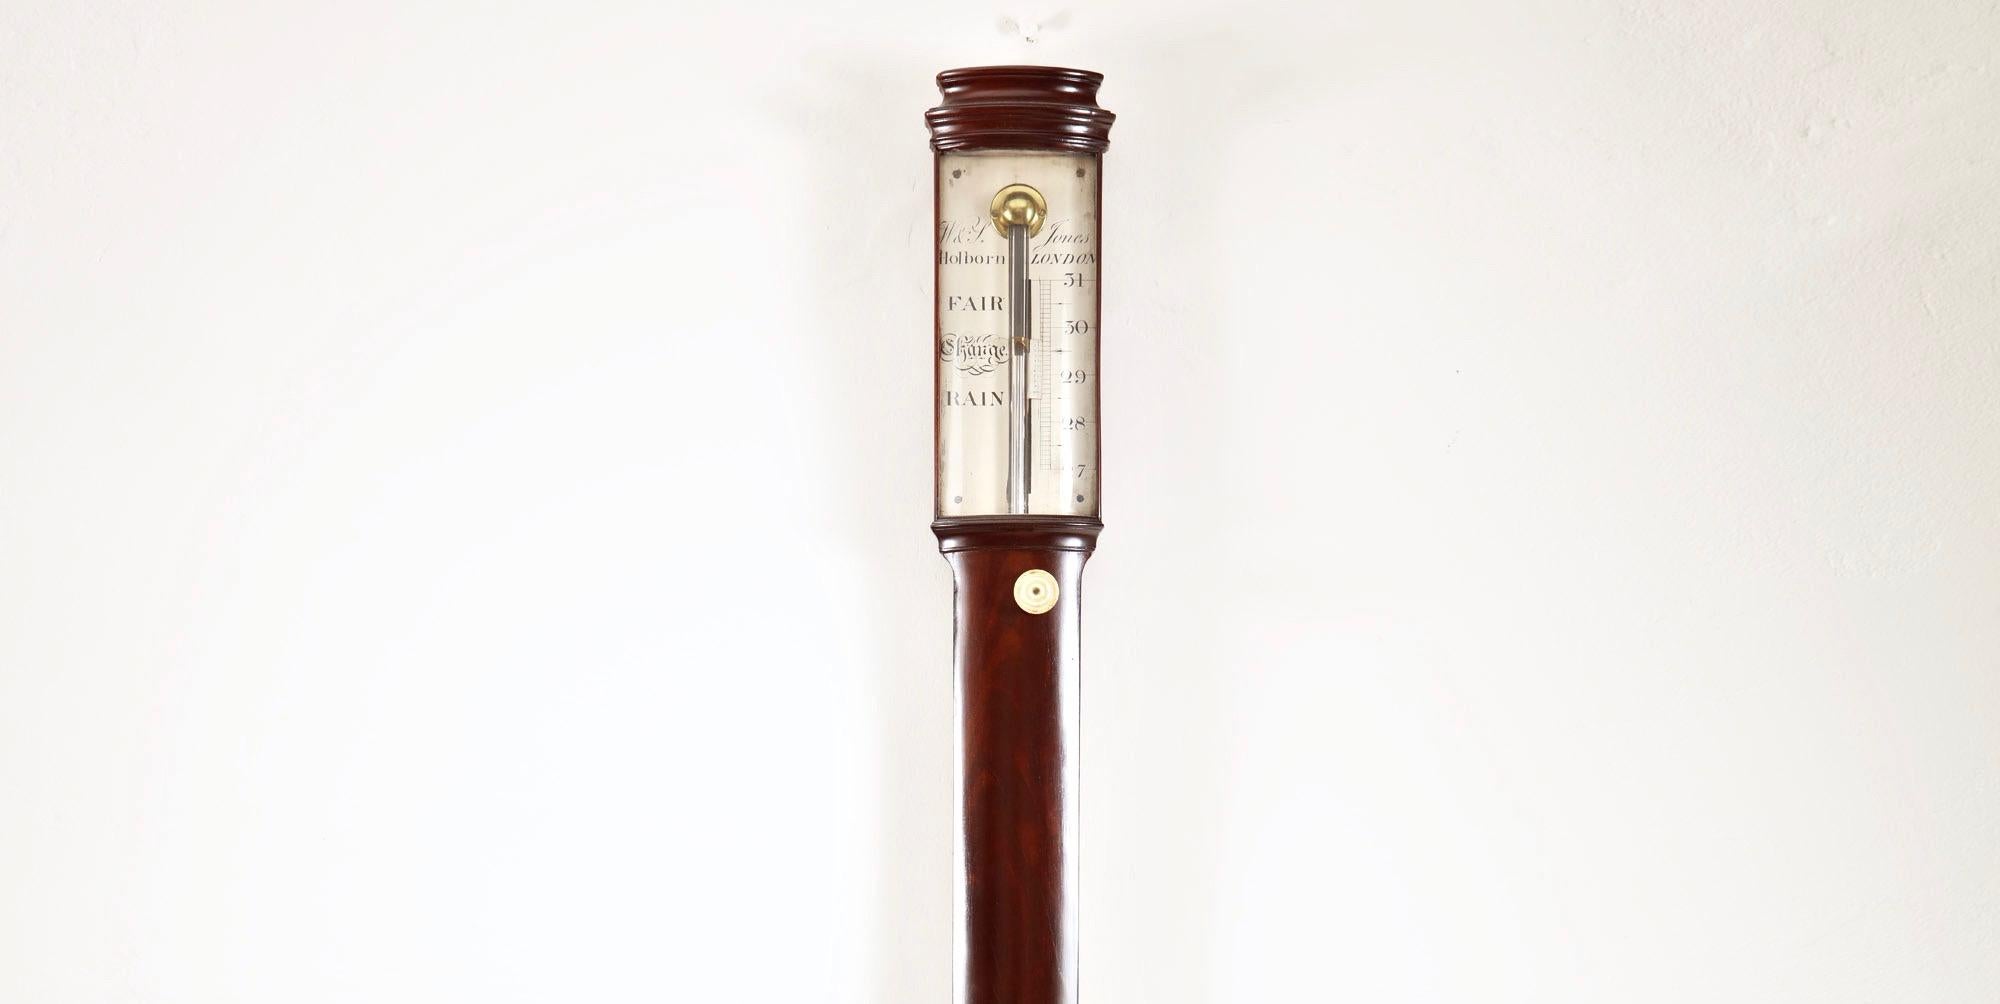 A fine George III mahogany stick barometer by noted London makers William & Samuel Jones. 

The mahogany-veneered case has an austere form with only the moulded caddy top and the urn-shaped cistern cover to break its soberness. The silvered